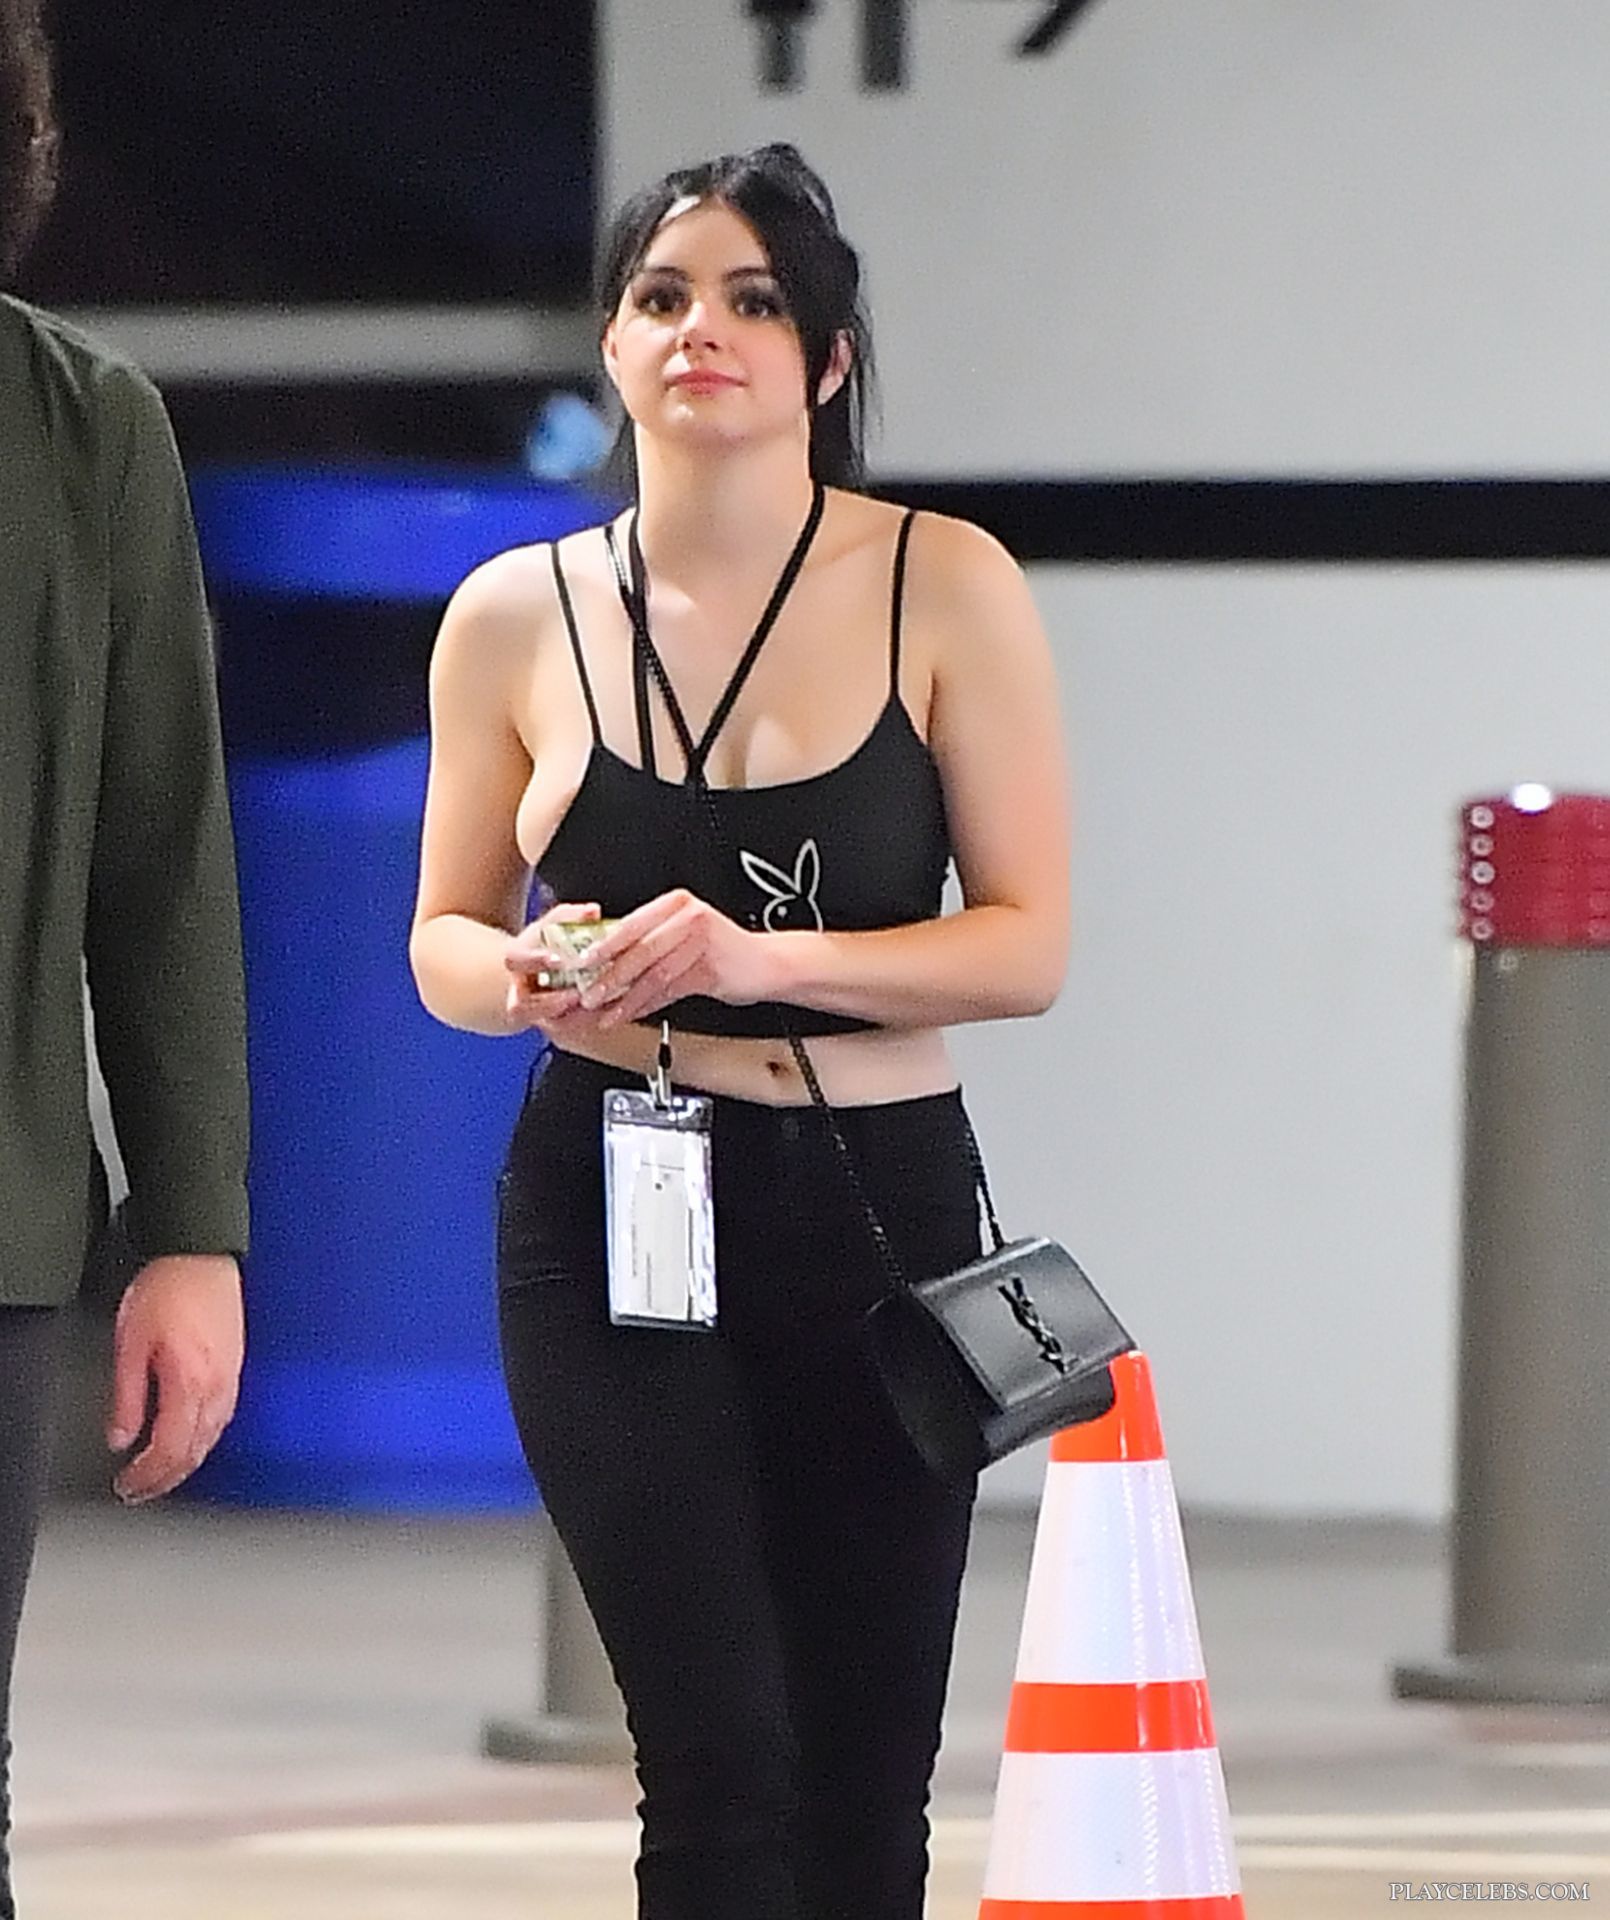 You are currently viewing Ariel Winter Oops NipSlip Moments